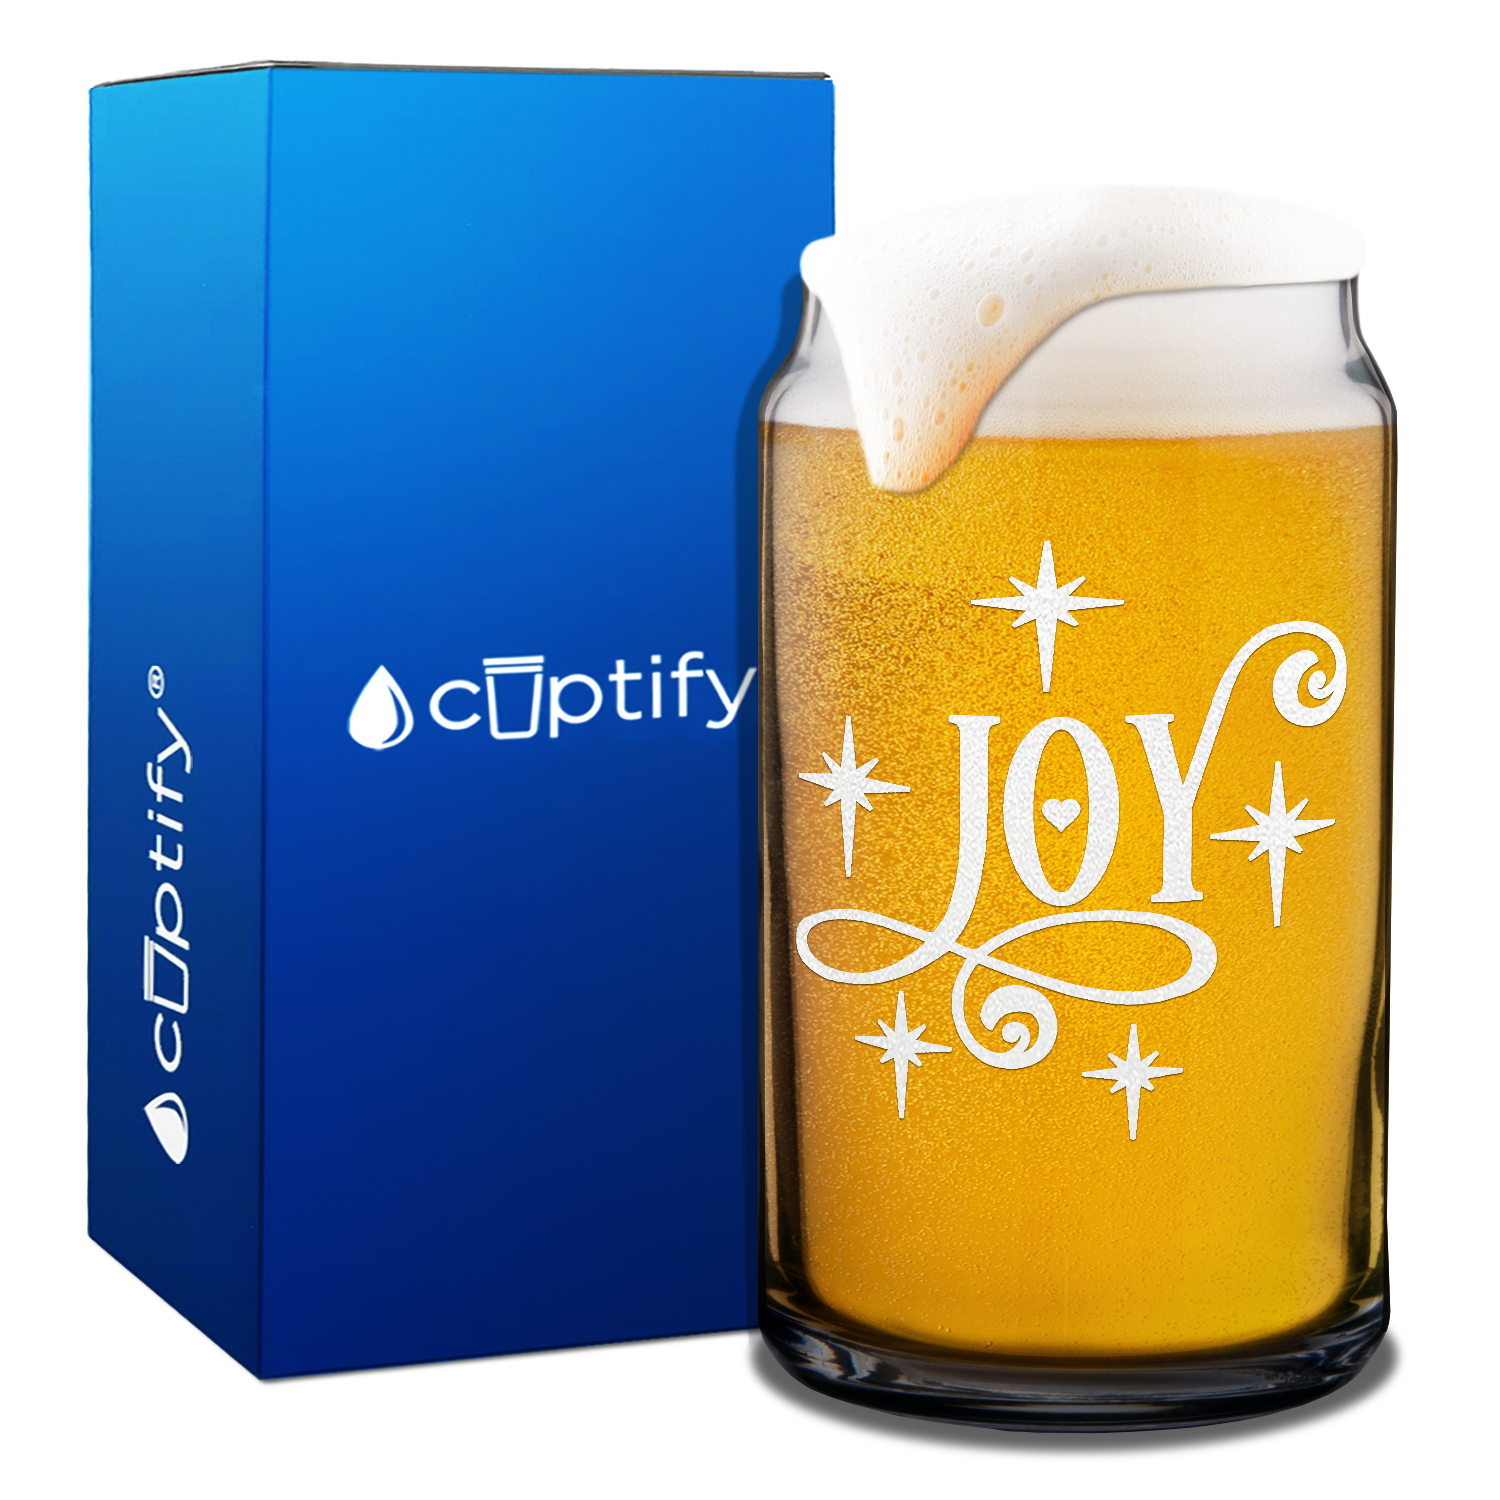 Joy on 16oz Beer Can Glass